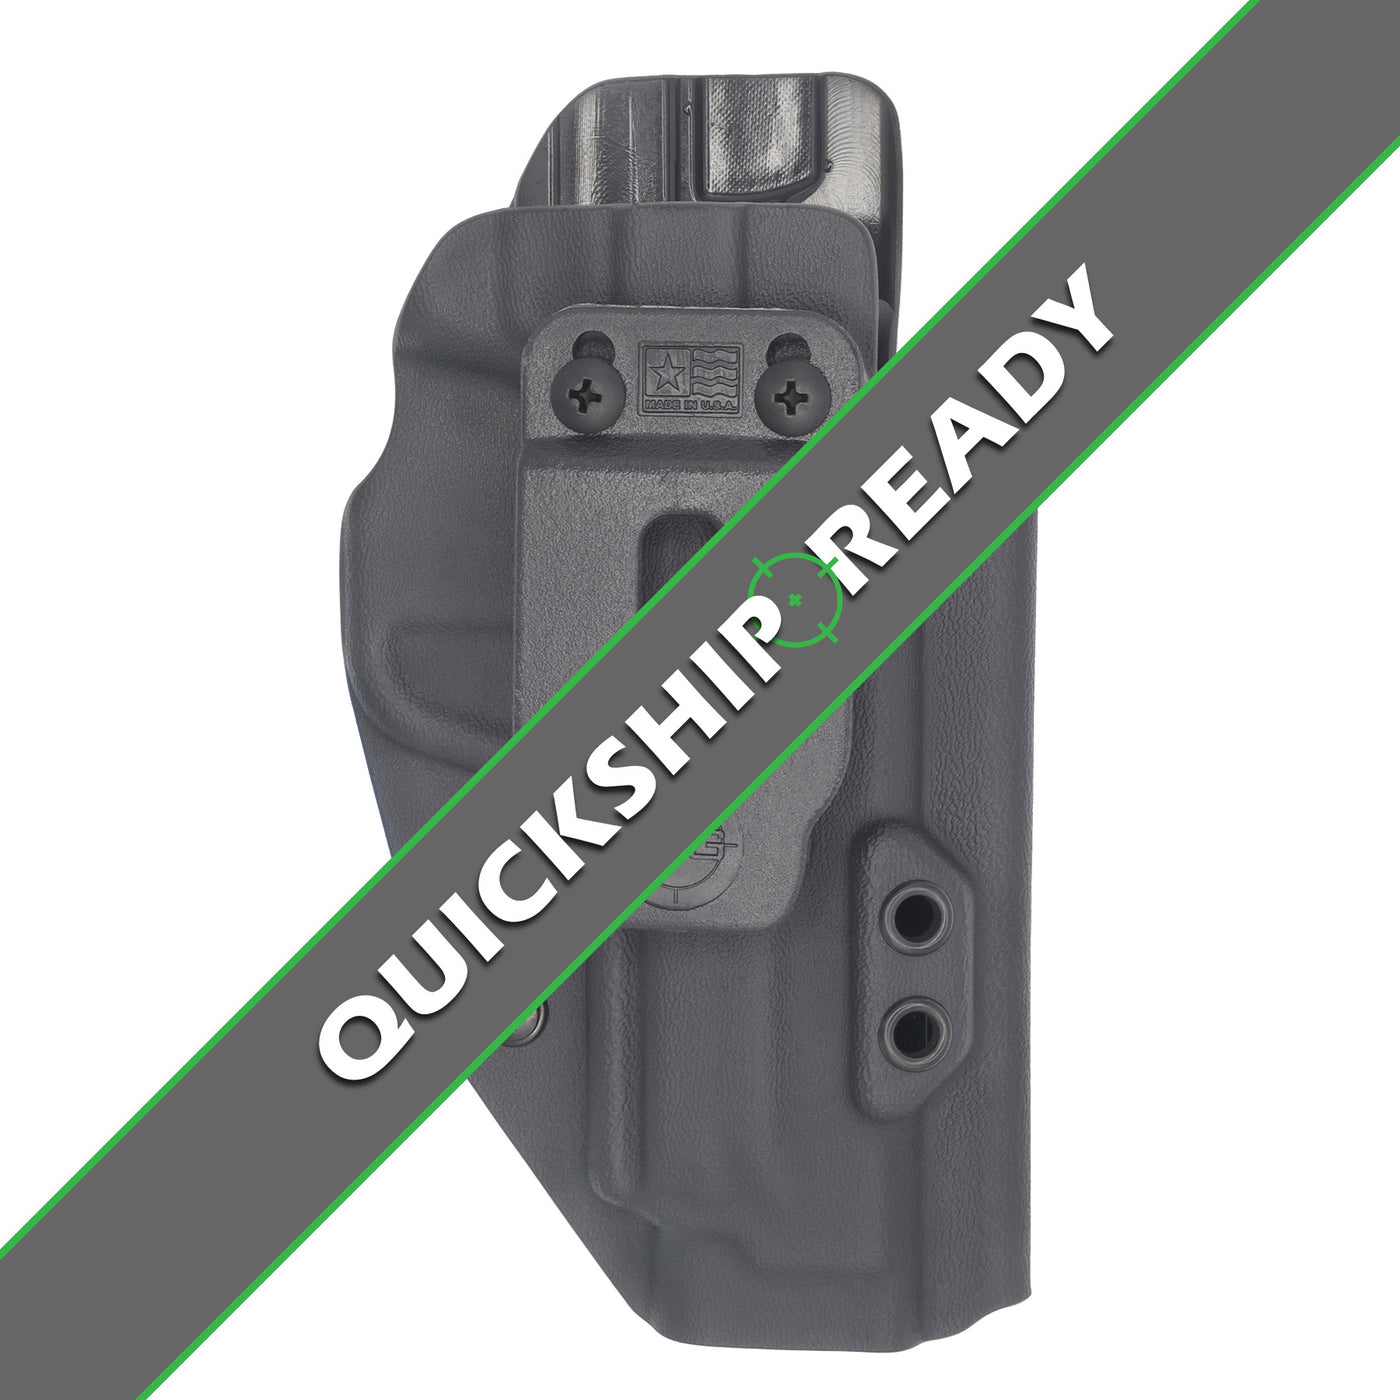 This is the C&G Holsters quickship covert series inside the waistband (IWB) holster for the Smith & Wesson M&P 9/40 4.25"